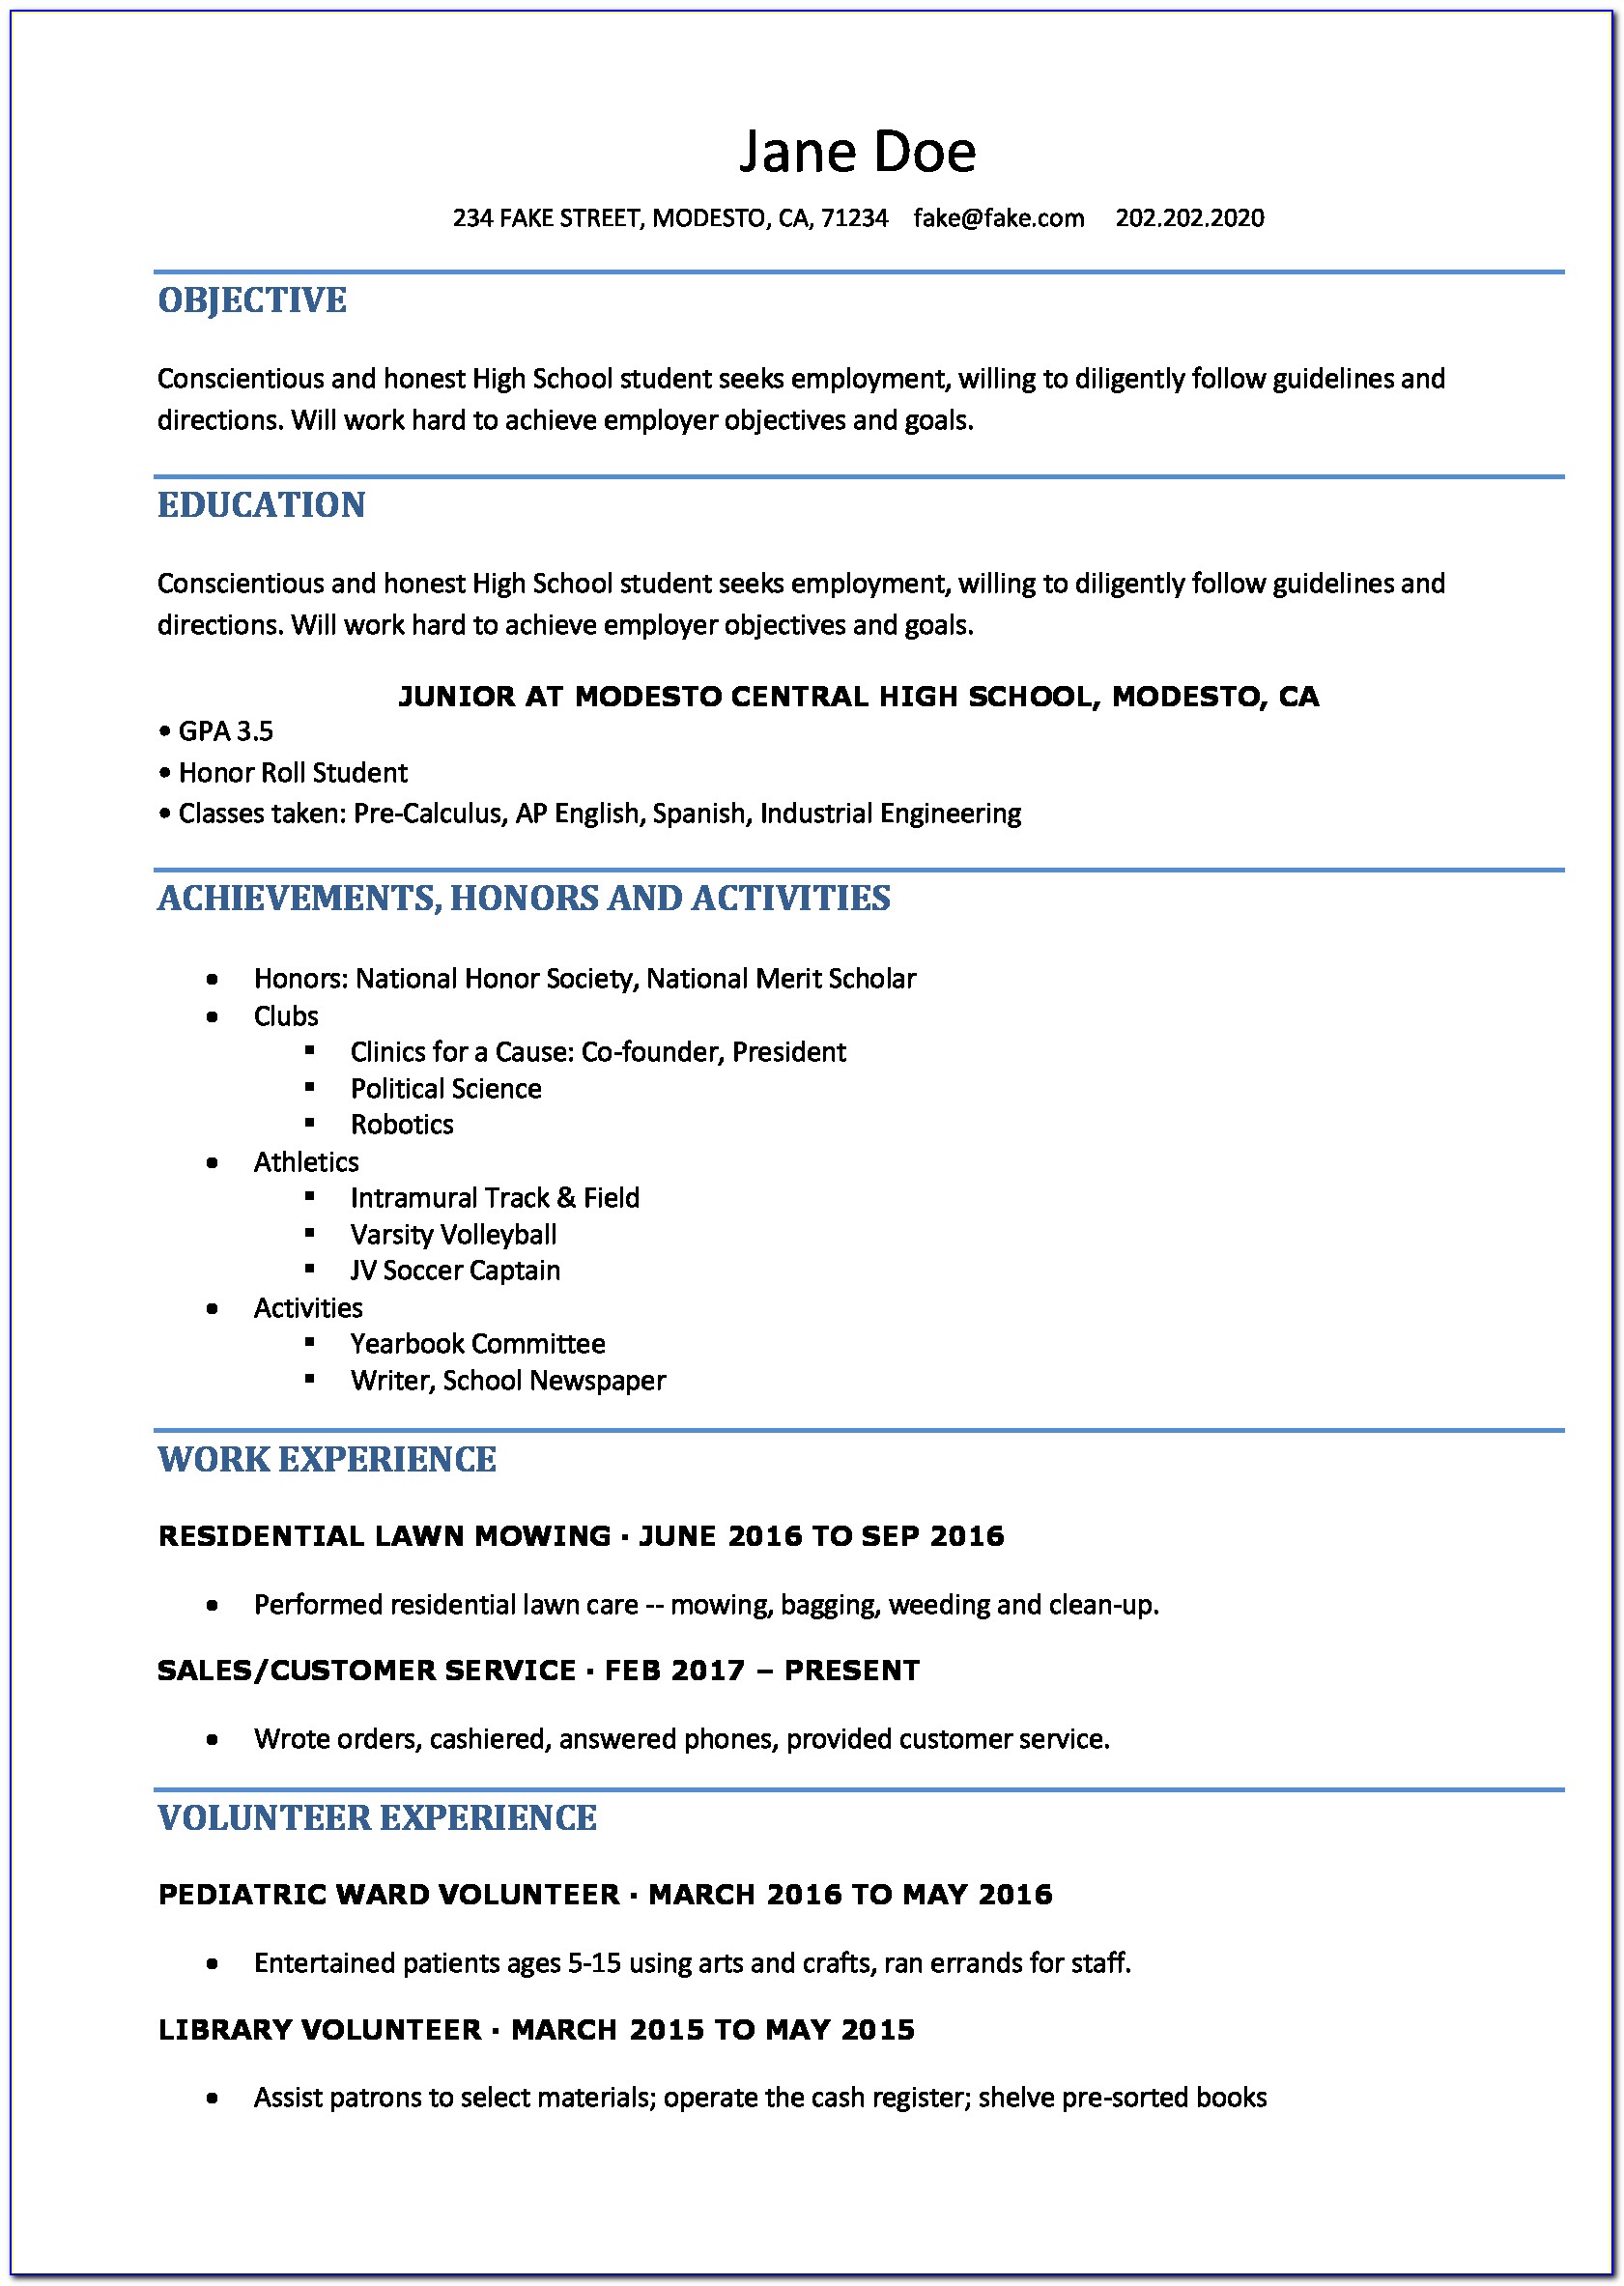 Free Resume Samples For Highschool Students